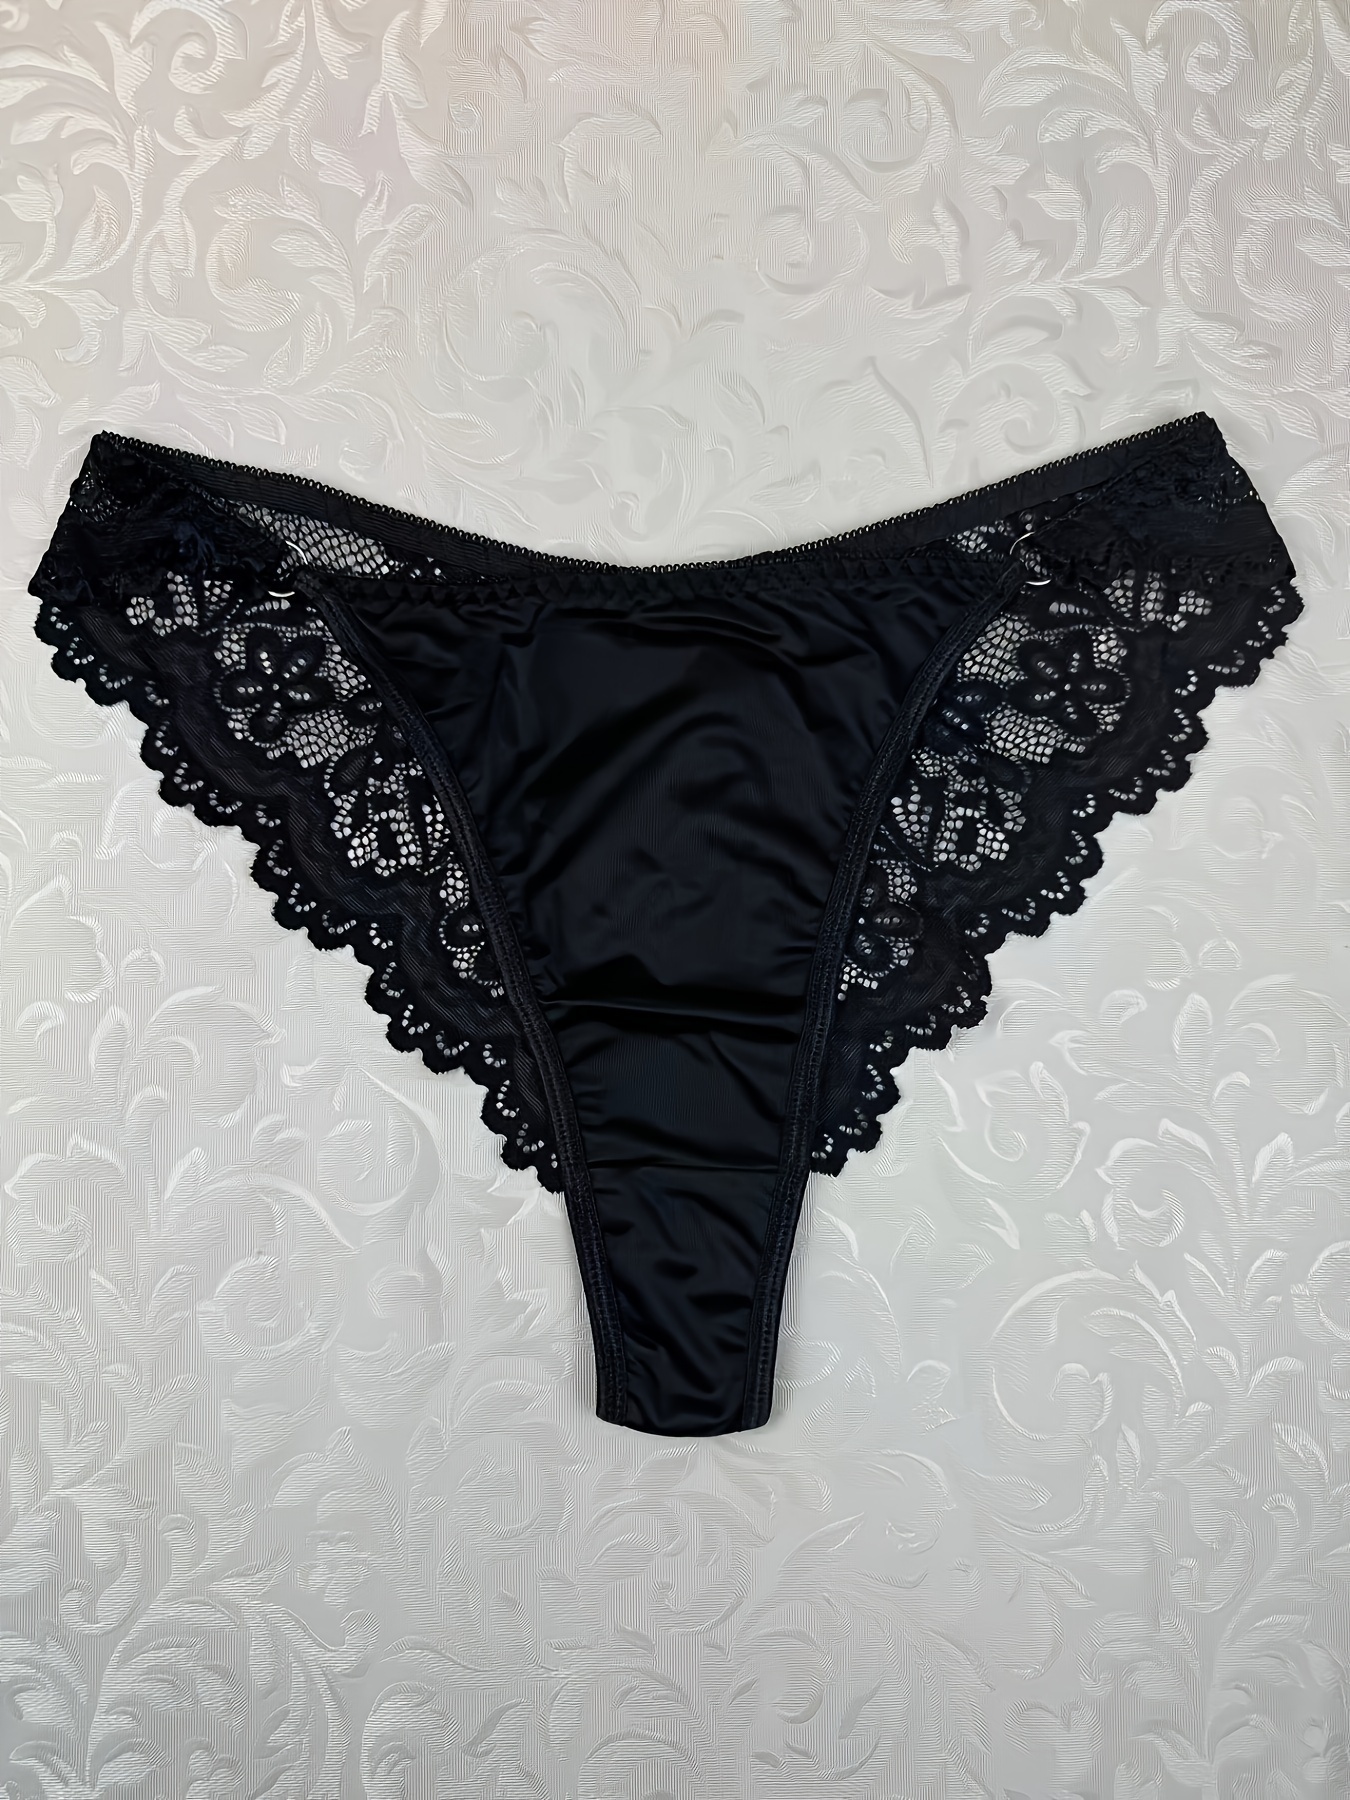 Sexy Sheer Lace Ruffle Beaded Low Rise G-String Thong for Women Black